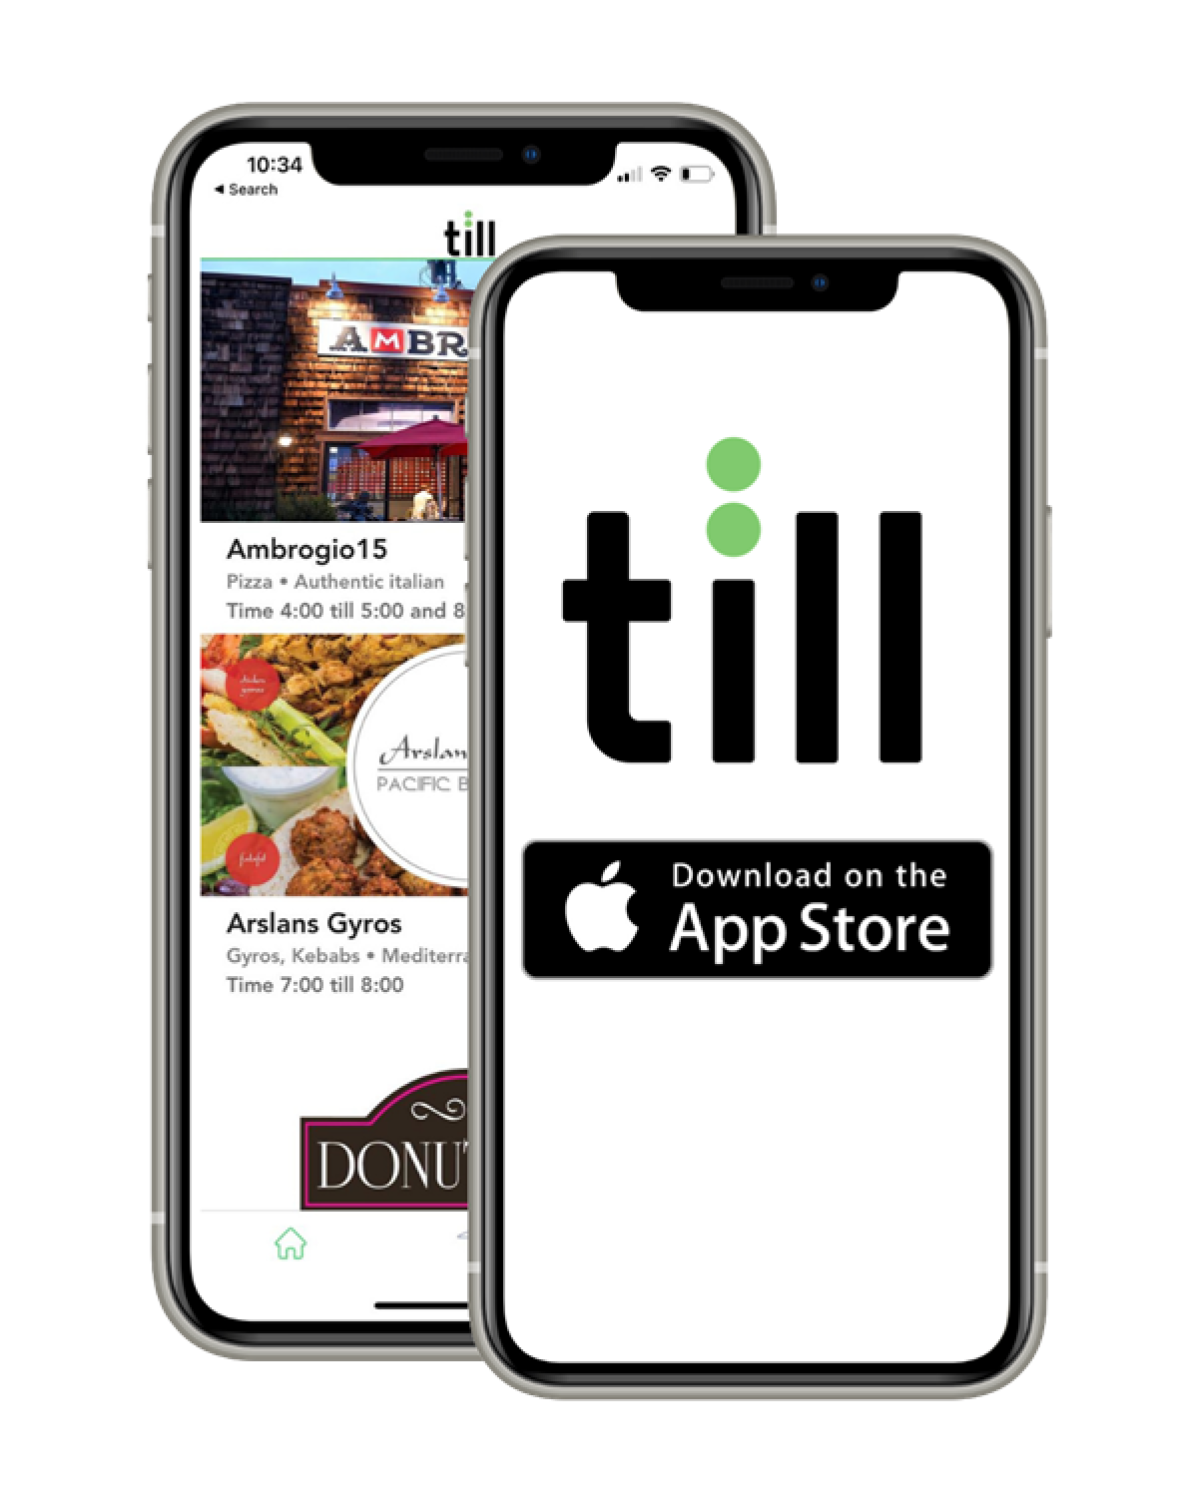 The logo and interface of Till the App.